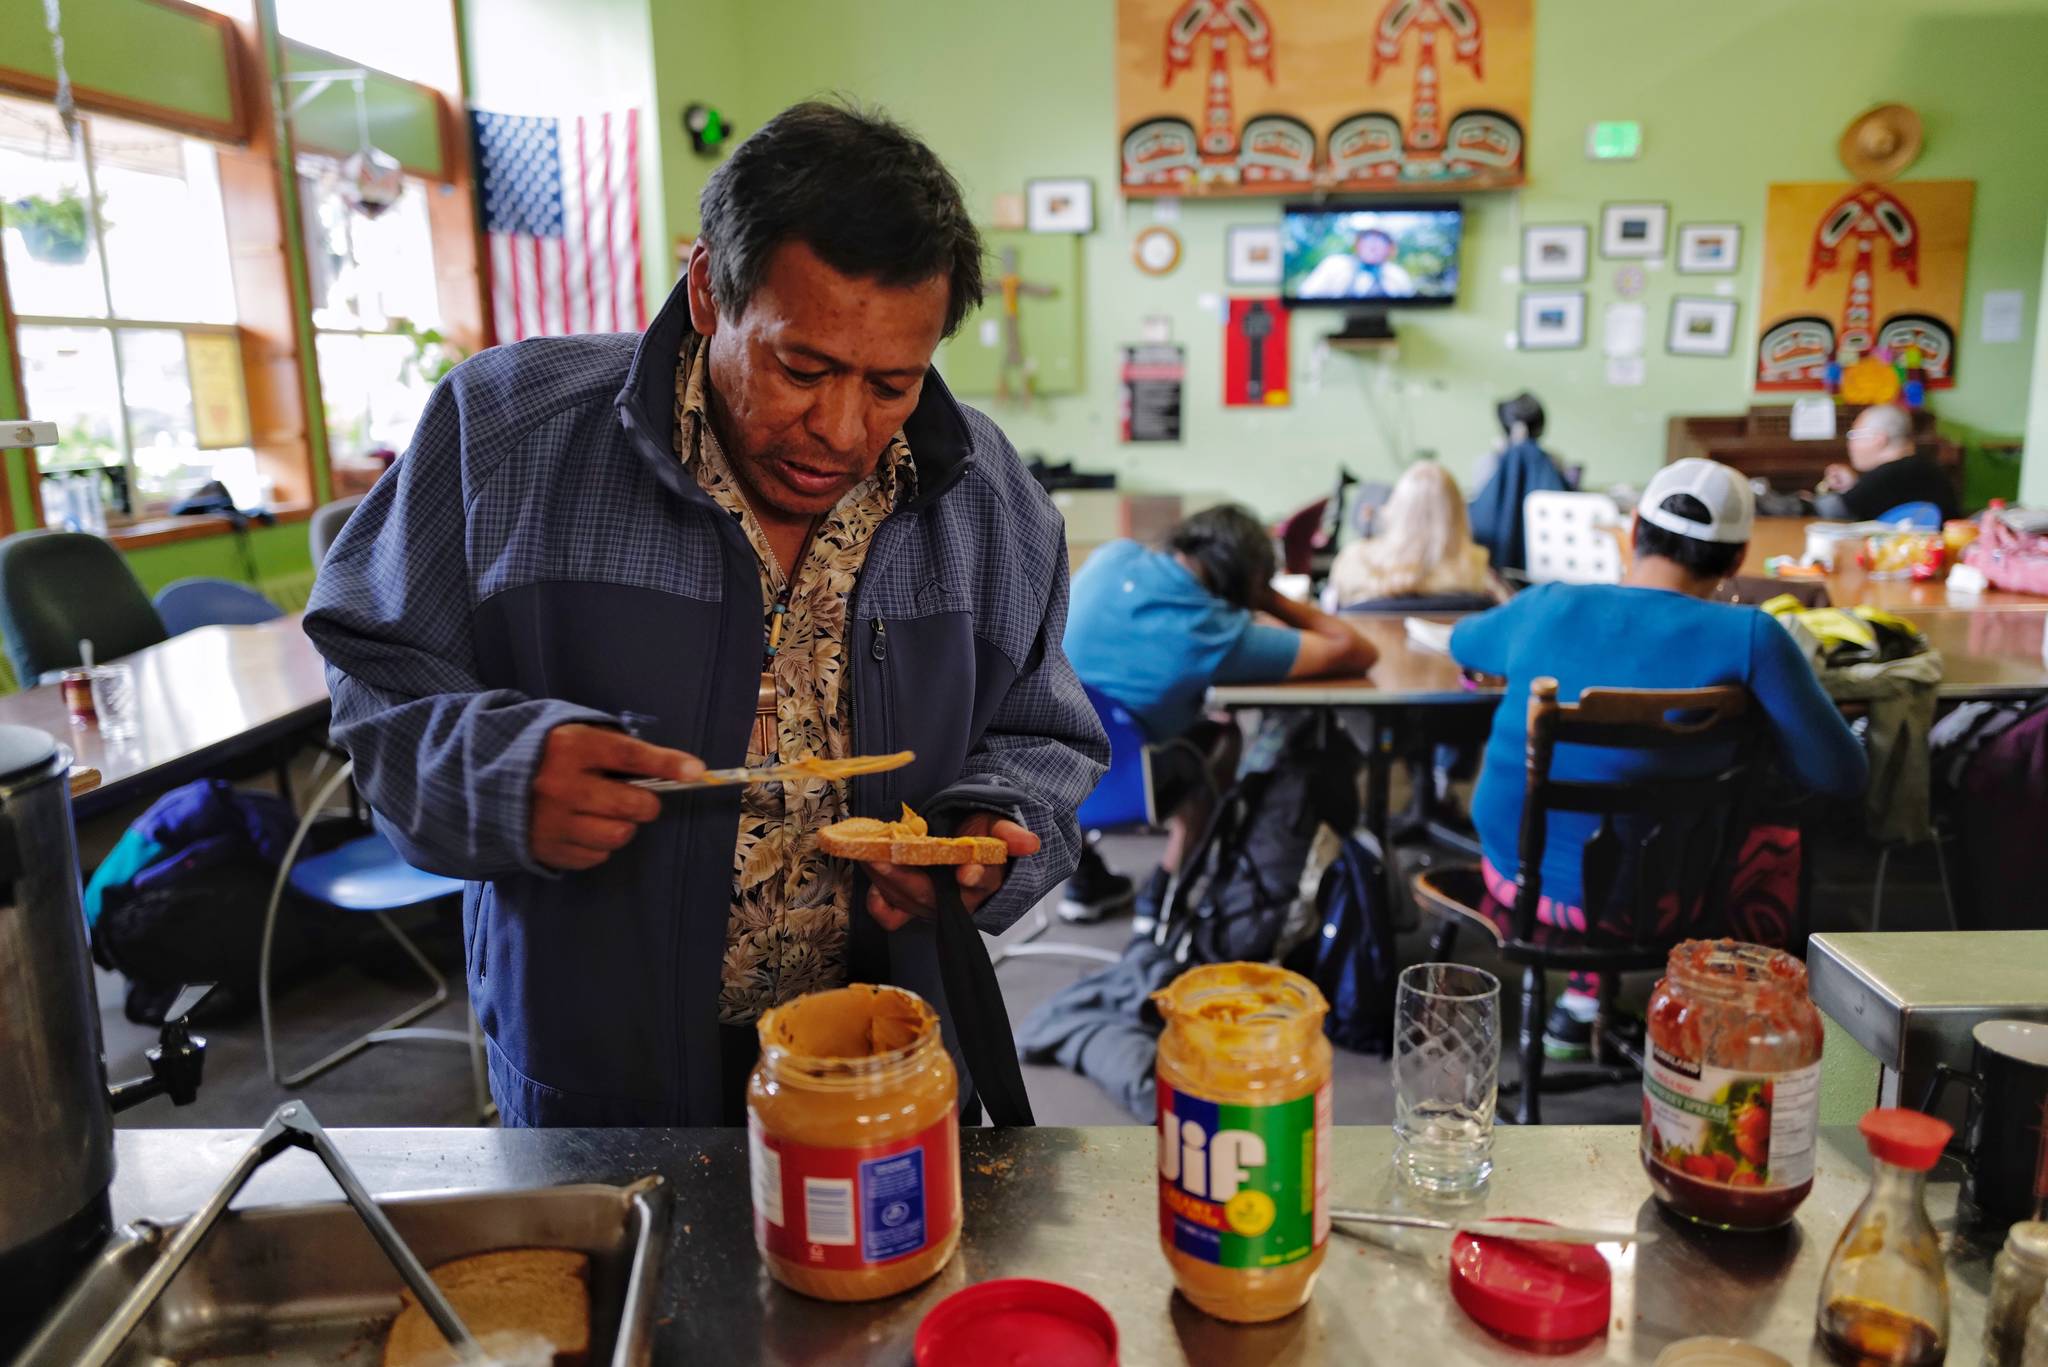 William Brown makes himself a peanut butter and jelly sandwich as he waits for dinner at the Glory Hall on Tuesday, July 2, 2019. (Michael Penn | Juneau Empire)